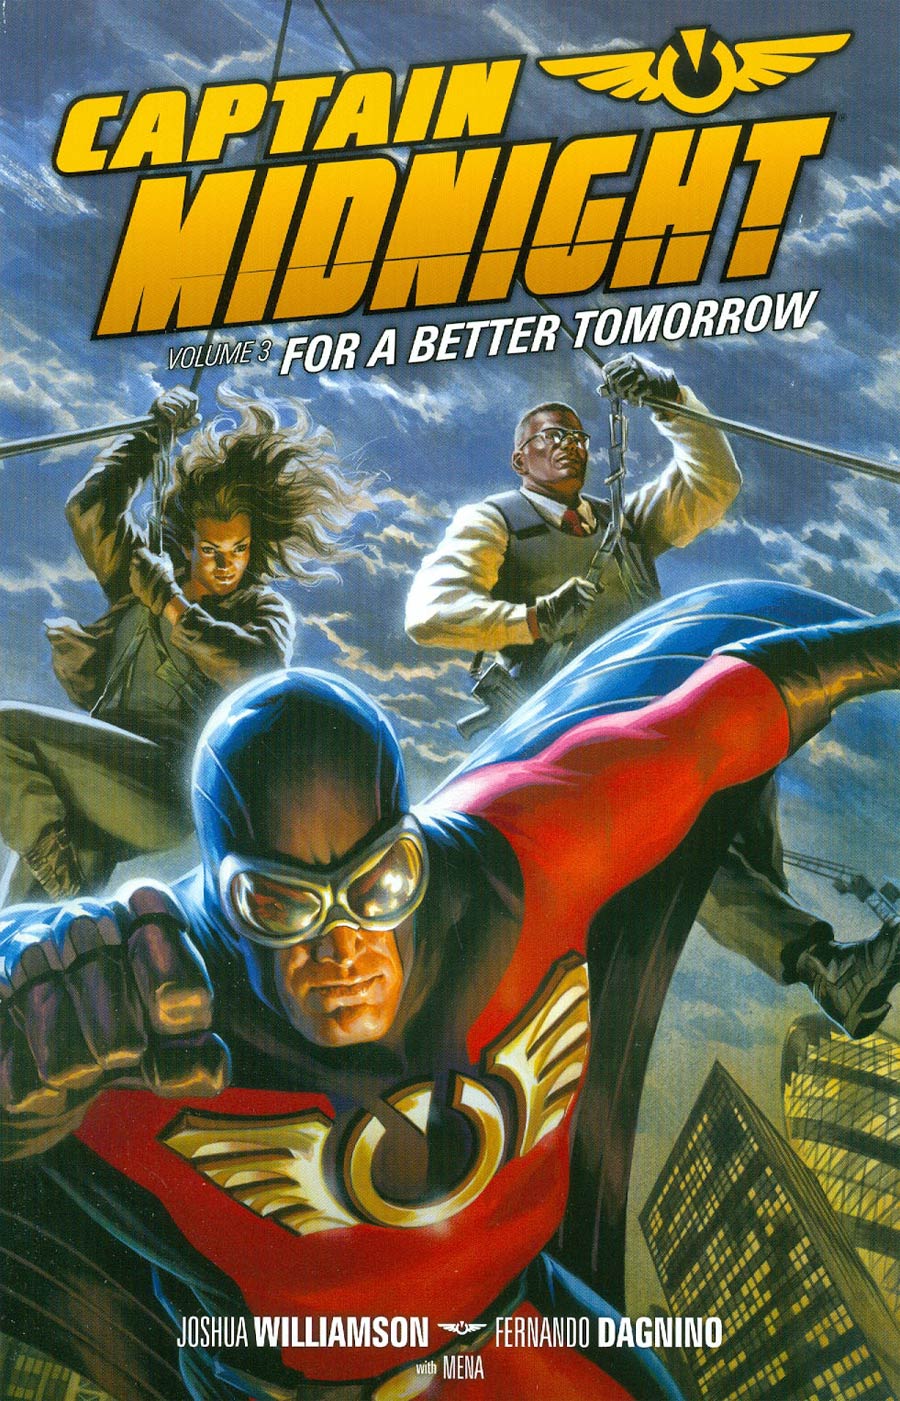 Captain Midnight Vol 3 For A Better Tomorrow TP